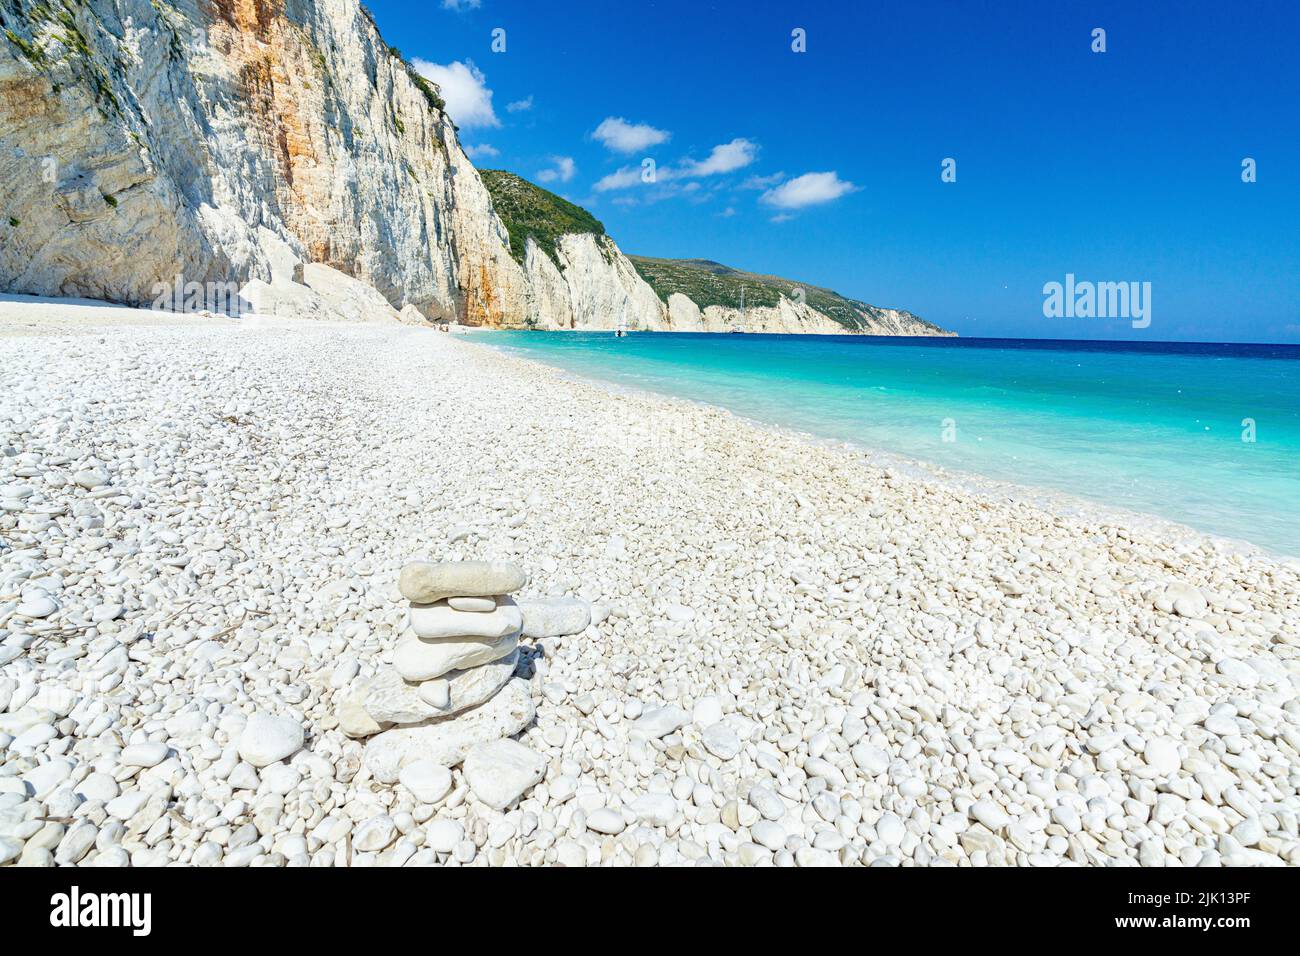 Bright sun on white pebbles of Fteri Beach washed by the turquoise sea, Kefalonia, Ionian Islands, Greek Islands, Greece, Europe Stock Photo